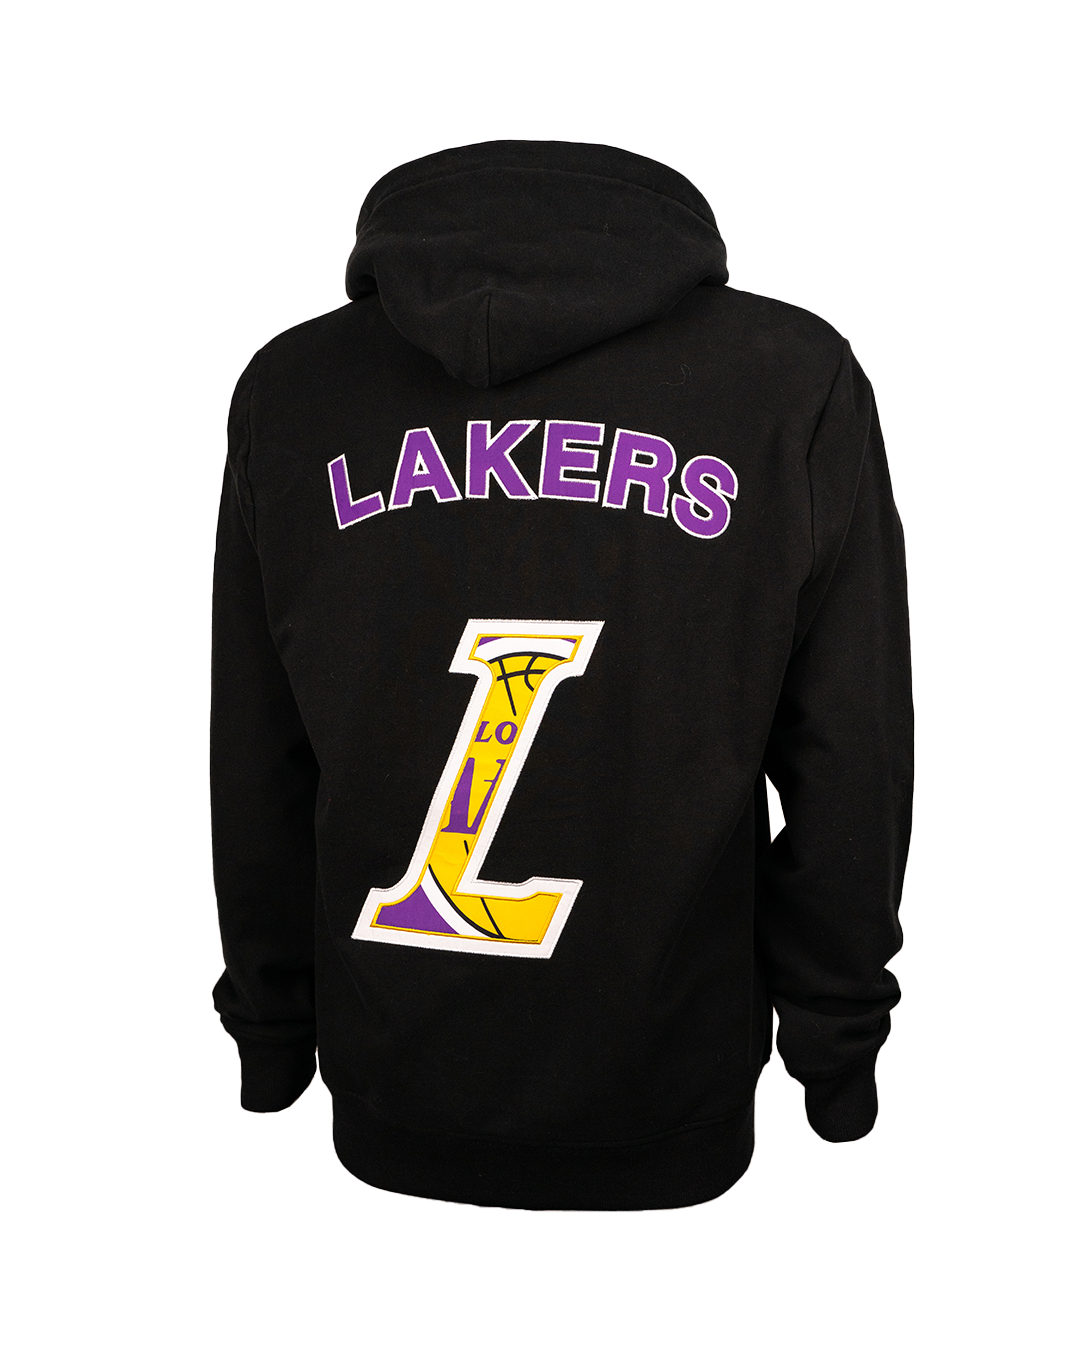 Los Angeles Lakers White Logo Hooded Sweatshirt Size Small